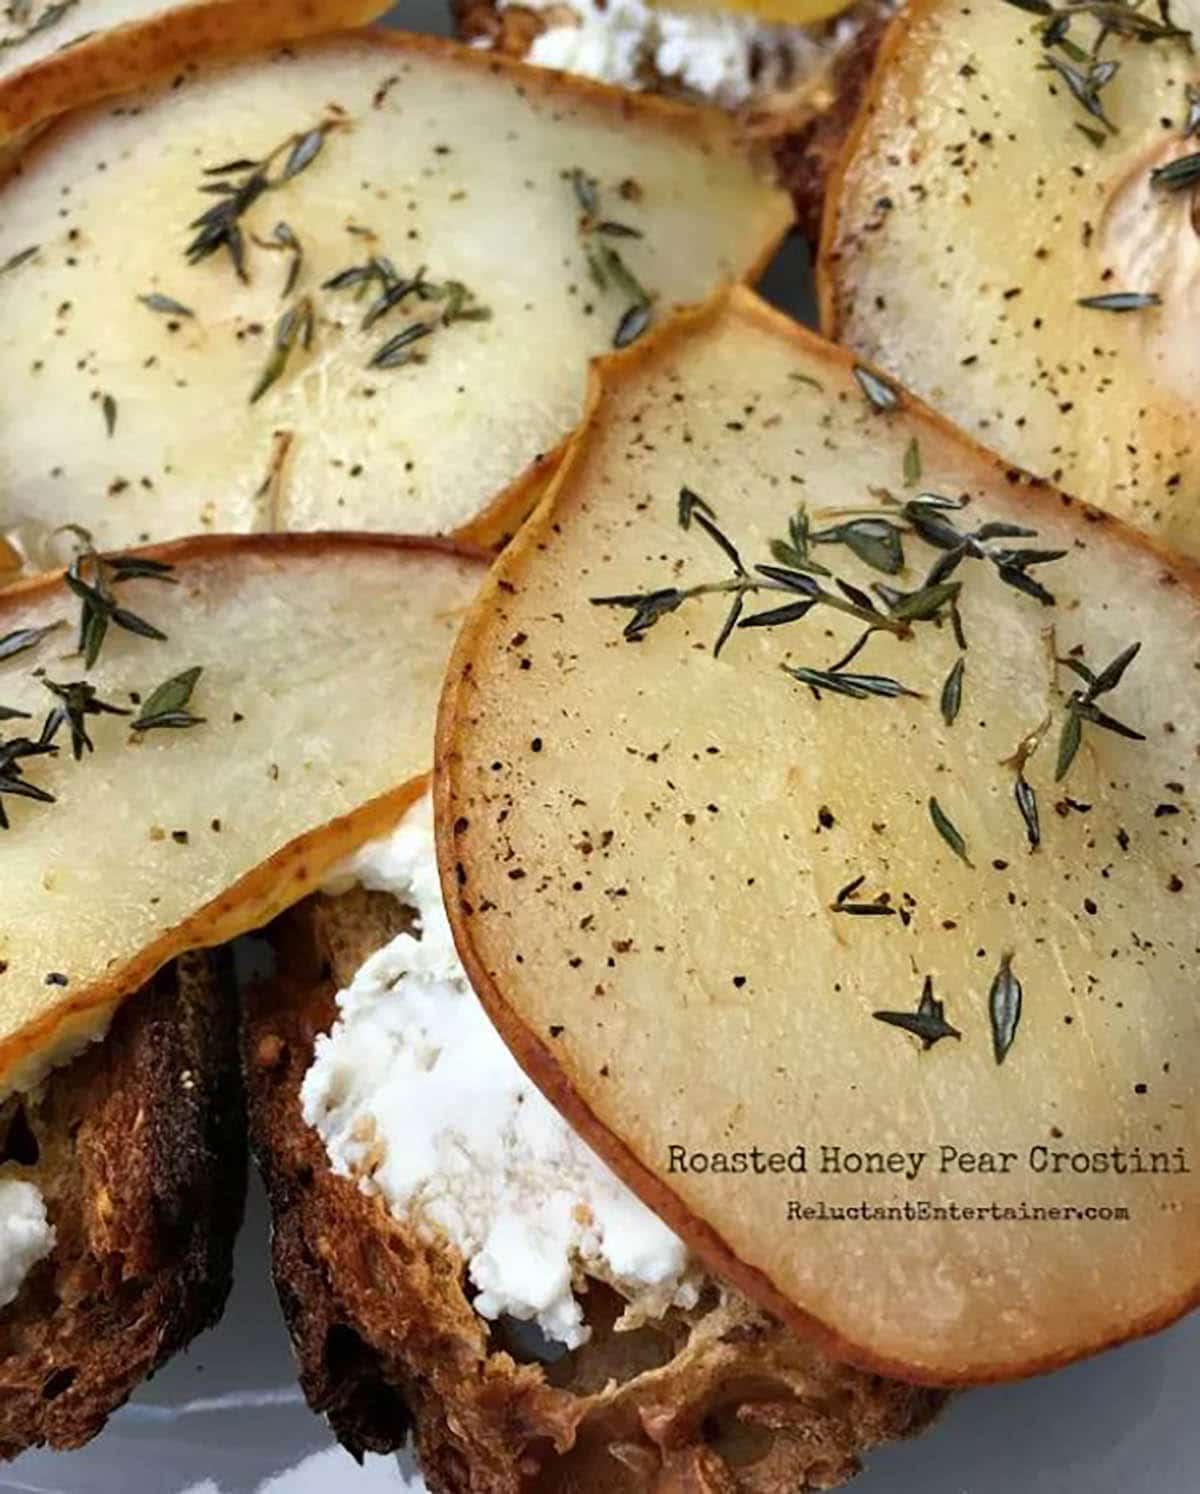 Roasted Honey Pear Crostini topped with rosemary 